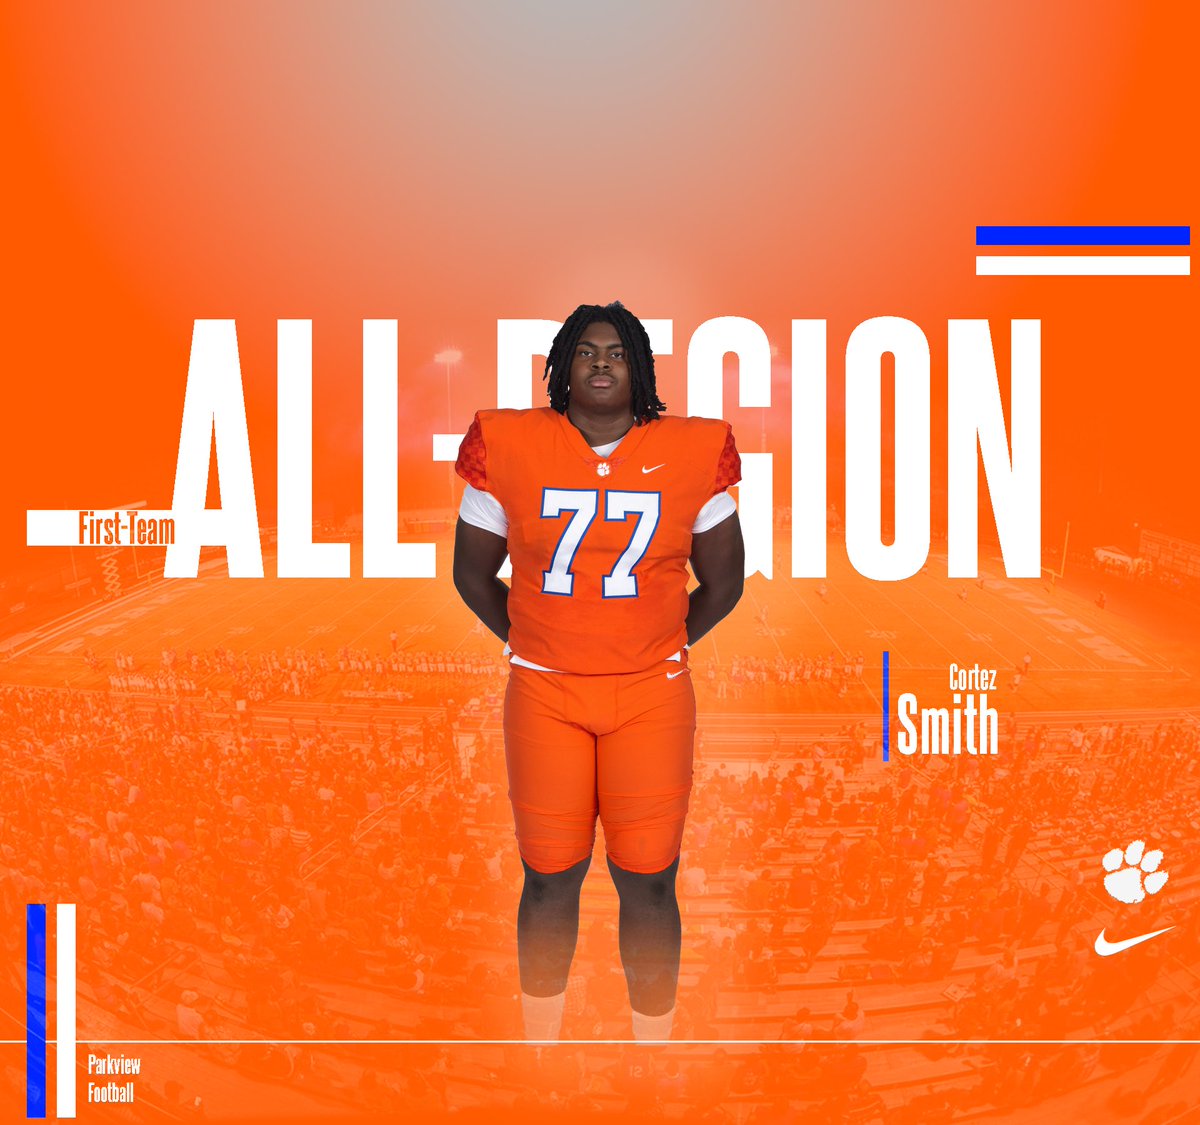 Congratulations to @OrnandoSmith for being named to the Region 4-AAAAAAA 1st Team All-Region! #𝐓𝐡𝐢𝐬𝐈𝐬𝐏𝐚𝐫𝐤𝐯𝐢𝐞𝐰